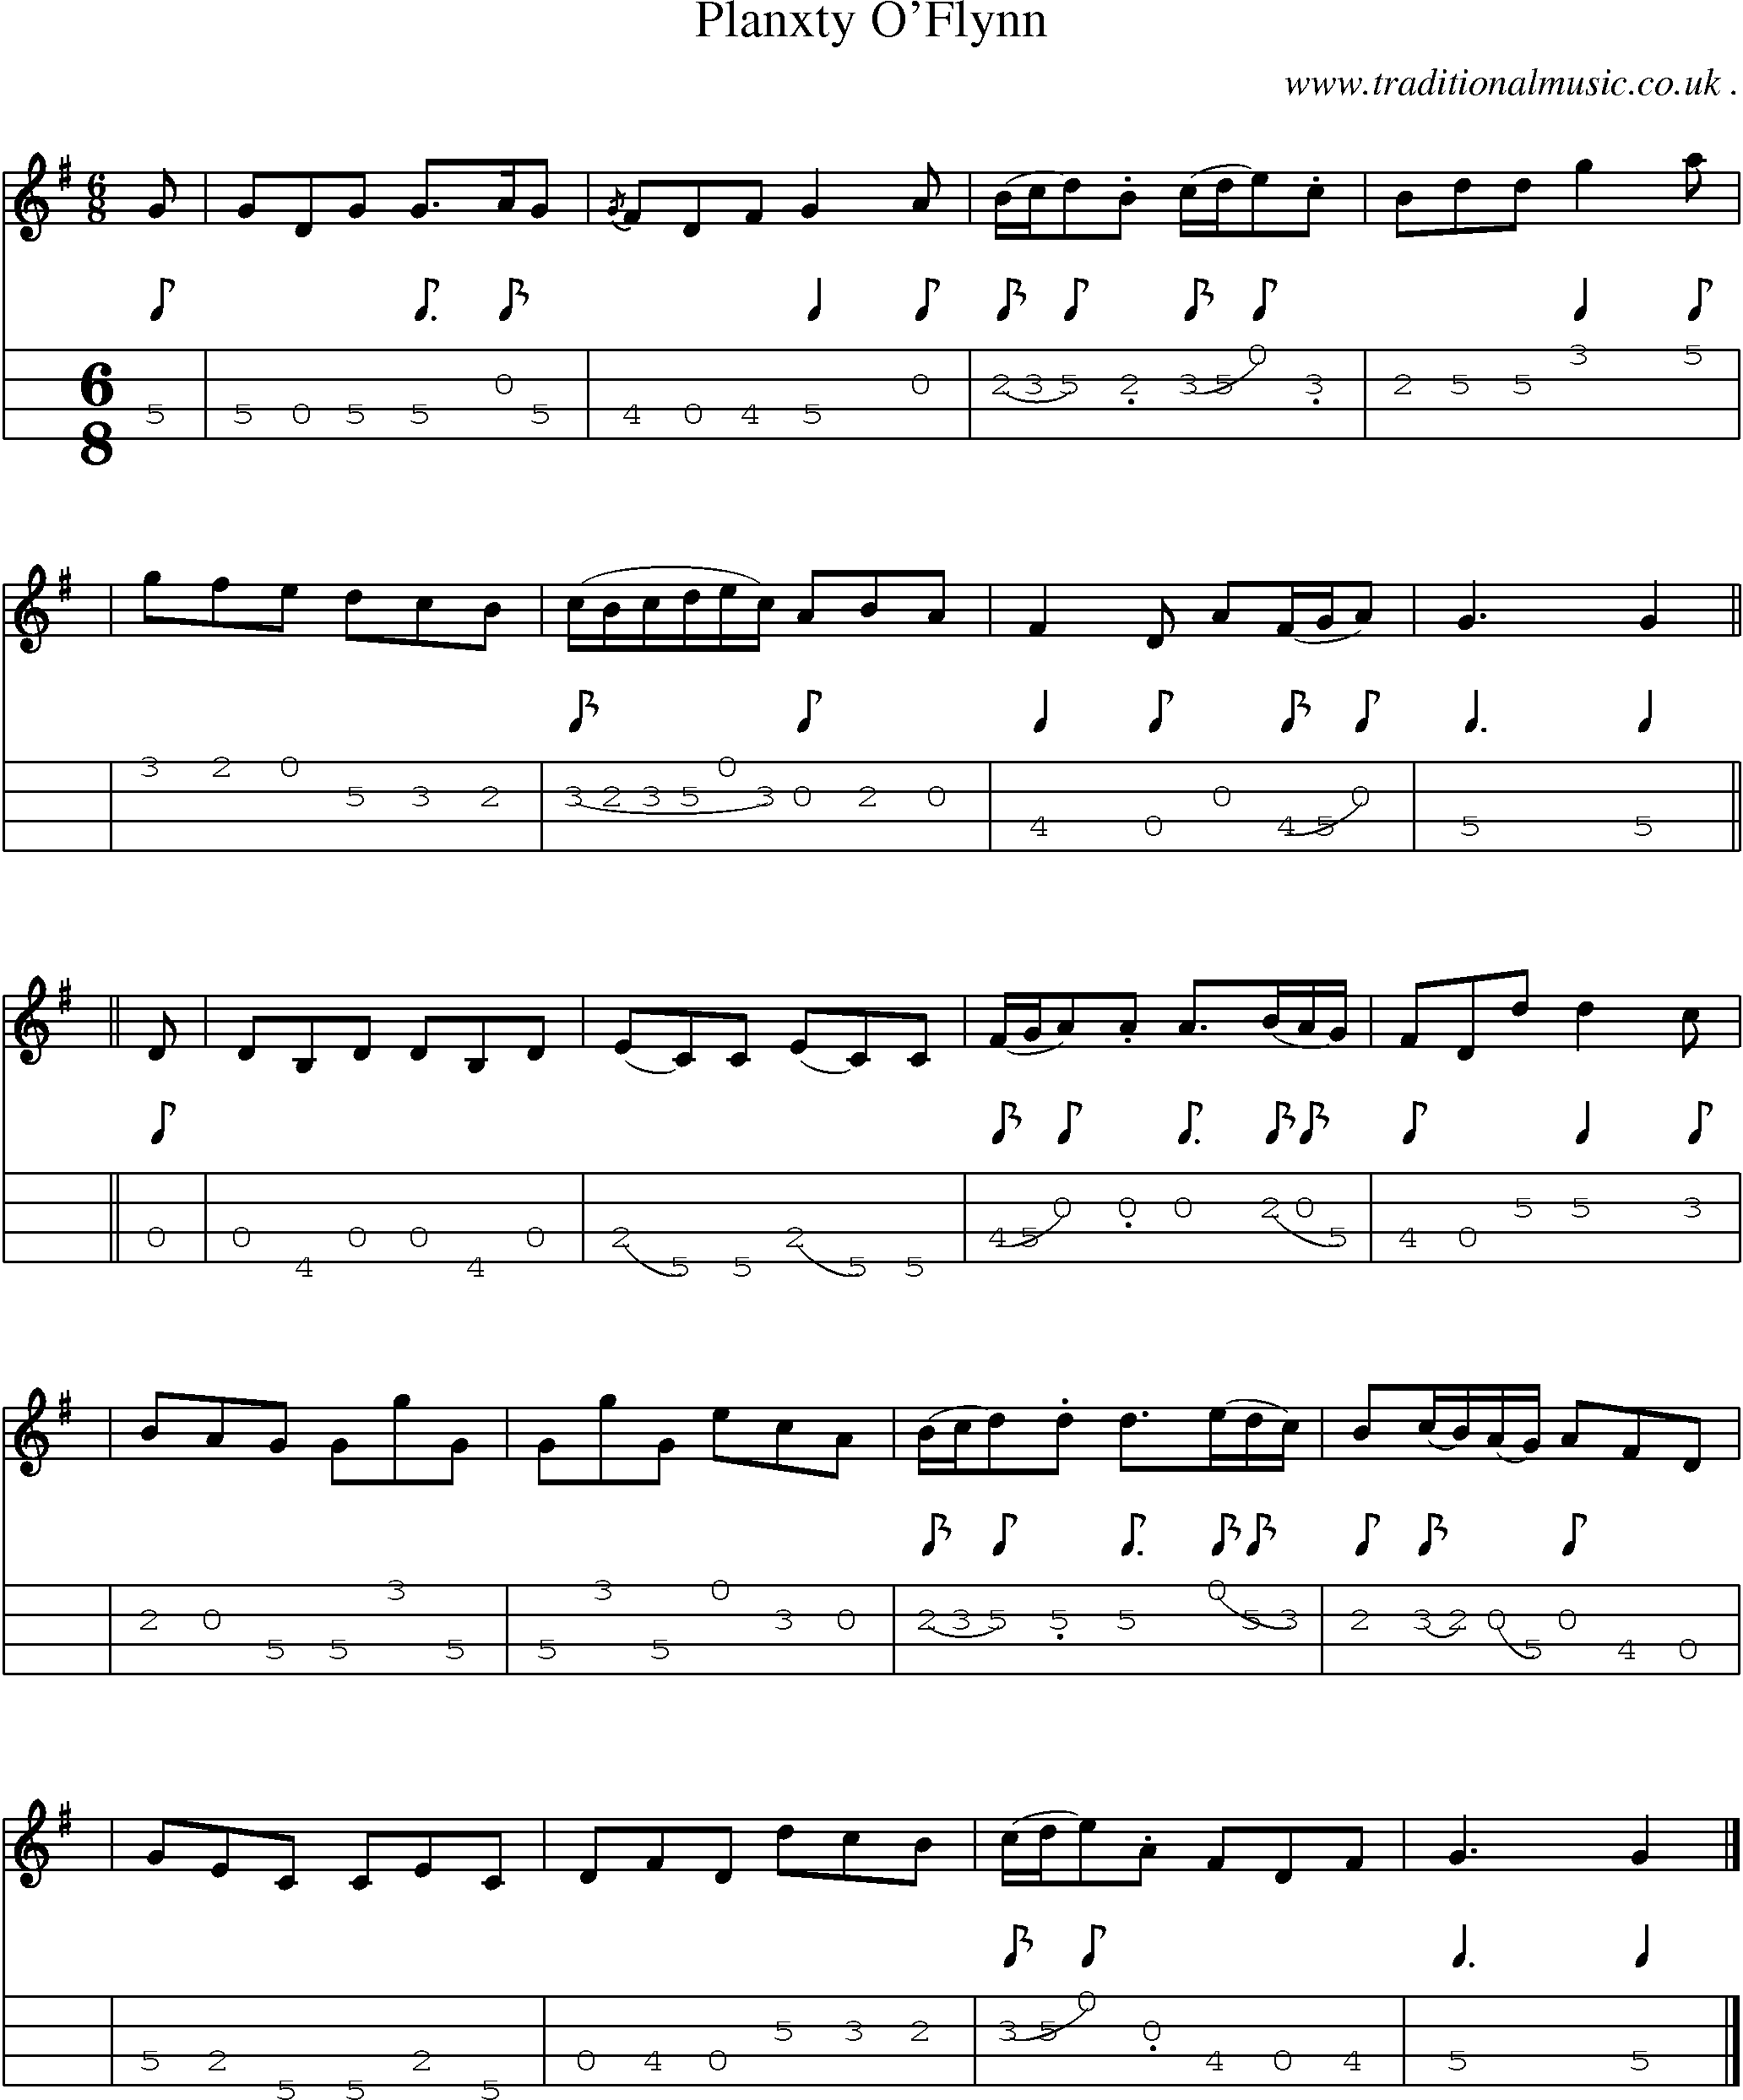 Sheet-music  score, Chords and Mandolin Tabs for Planxty Oflynn